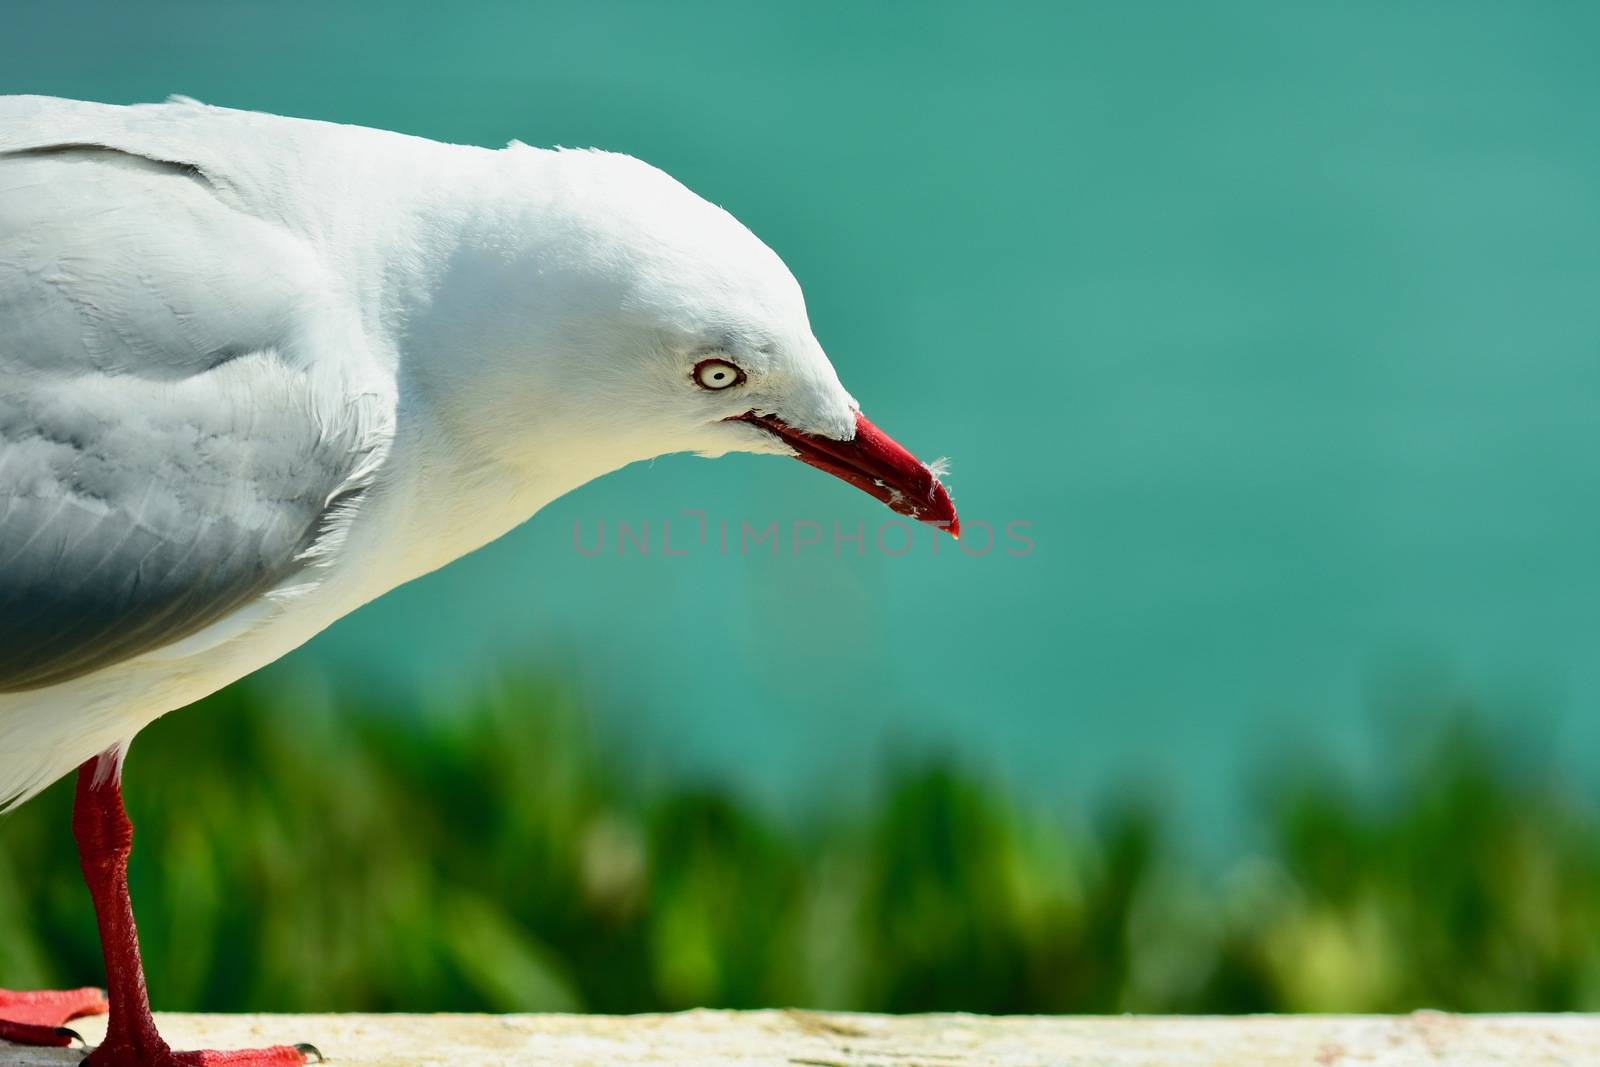 A close-up photo of a bird; mature red-beaked sea gull in natural environment